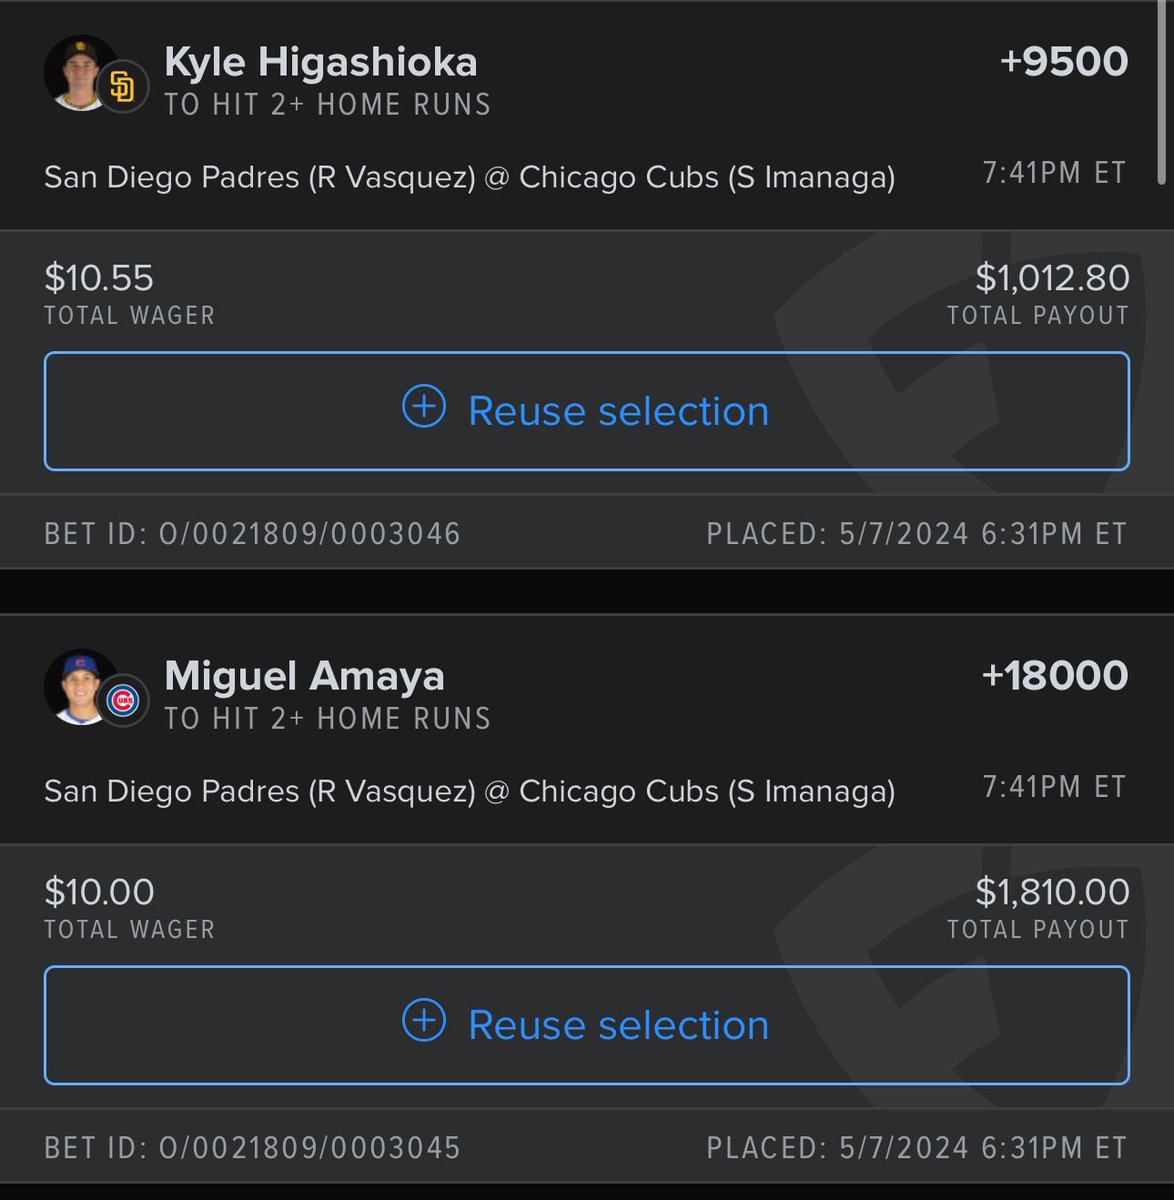 Lottos for tonight:

All dropped in @OxJuiced first

Starting to drop more +EV straights in there & also tailing those guys PrizePicks slips as well

This helps with the dogshit lotto variance - but lottos will always be posted here as well!

3d free trial here: